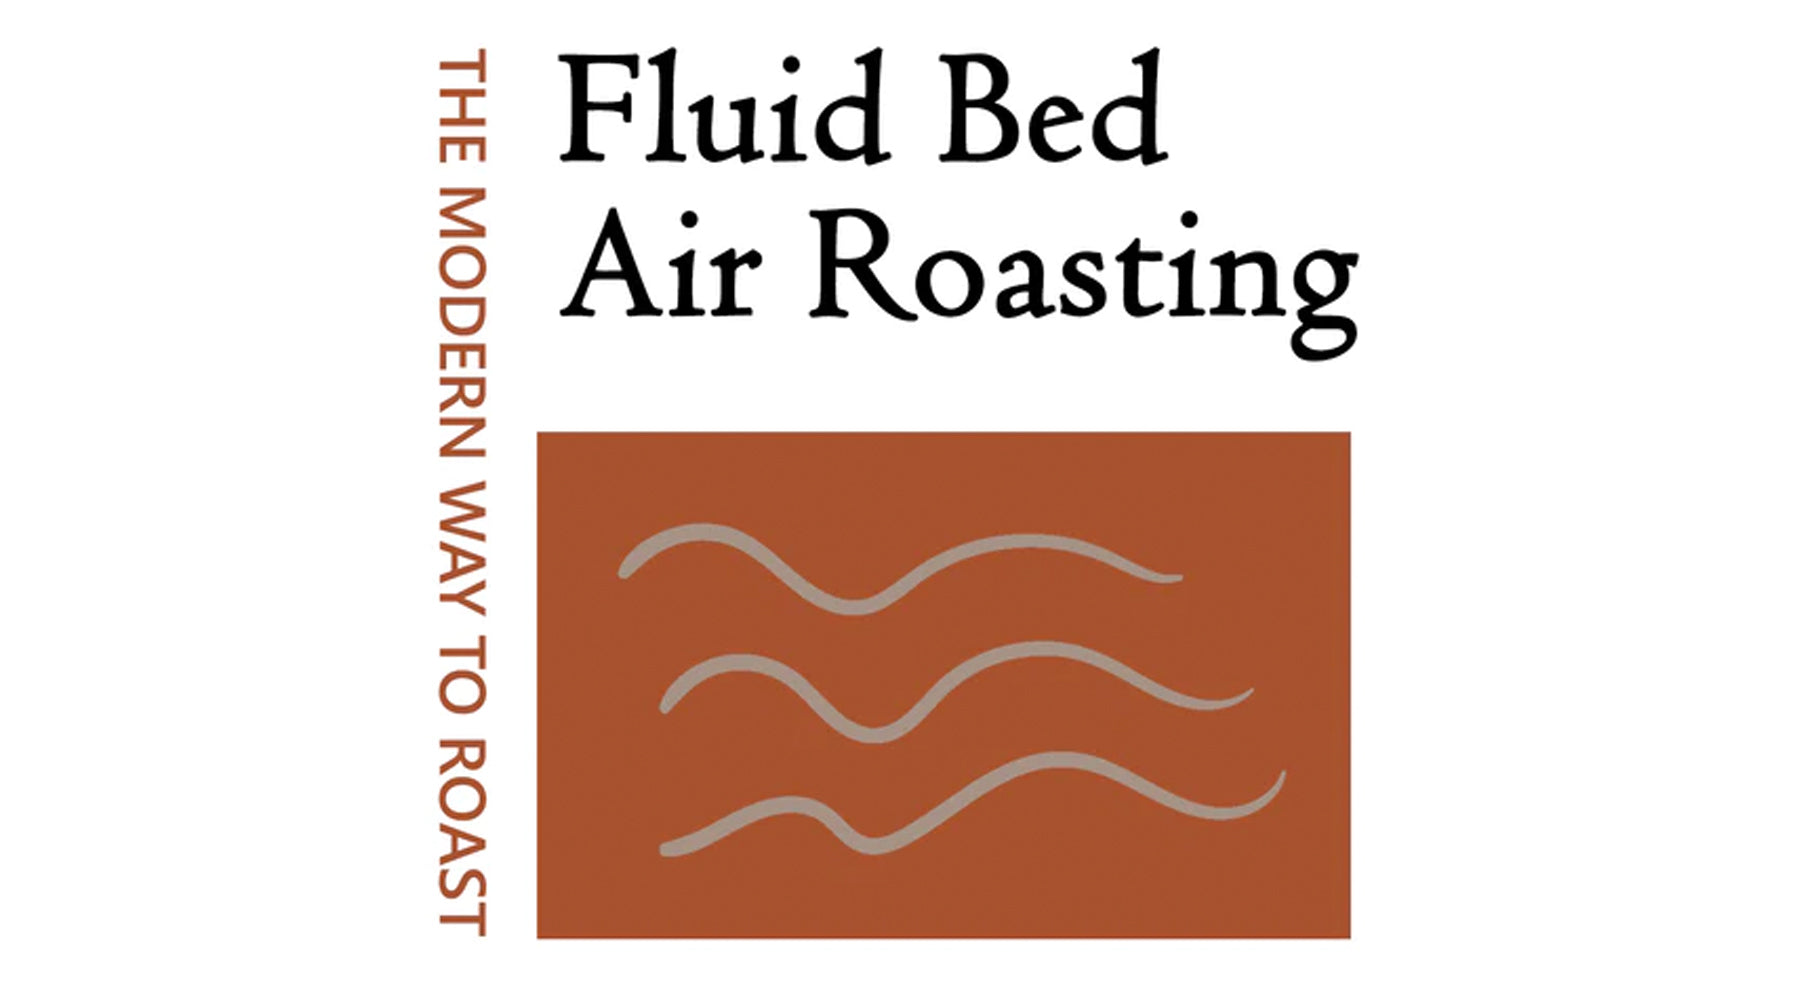 Fluid Bed Air Roasting: The Modern Way to Roast